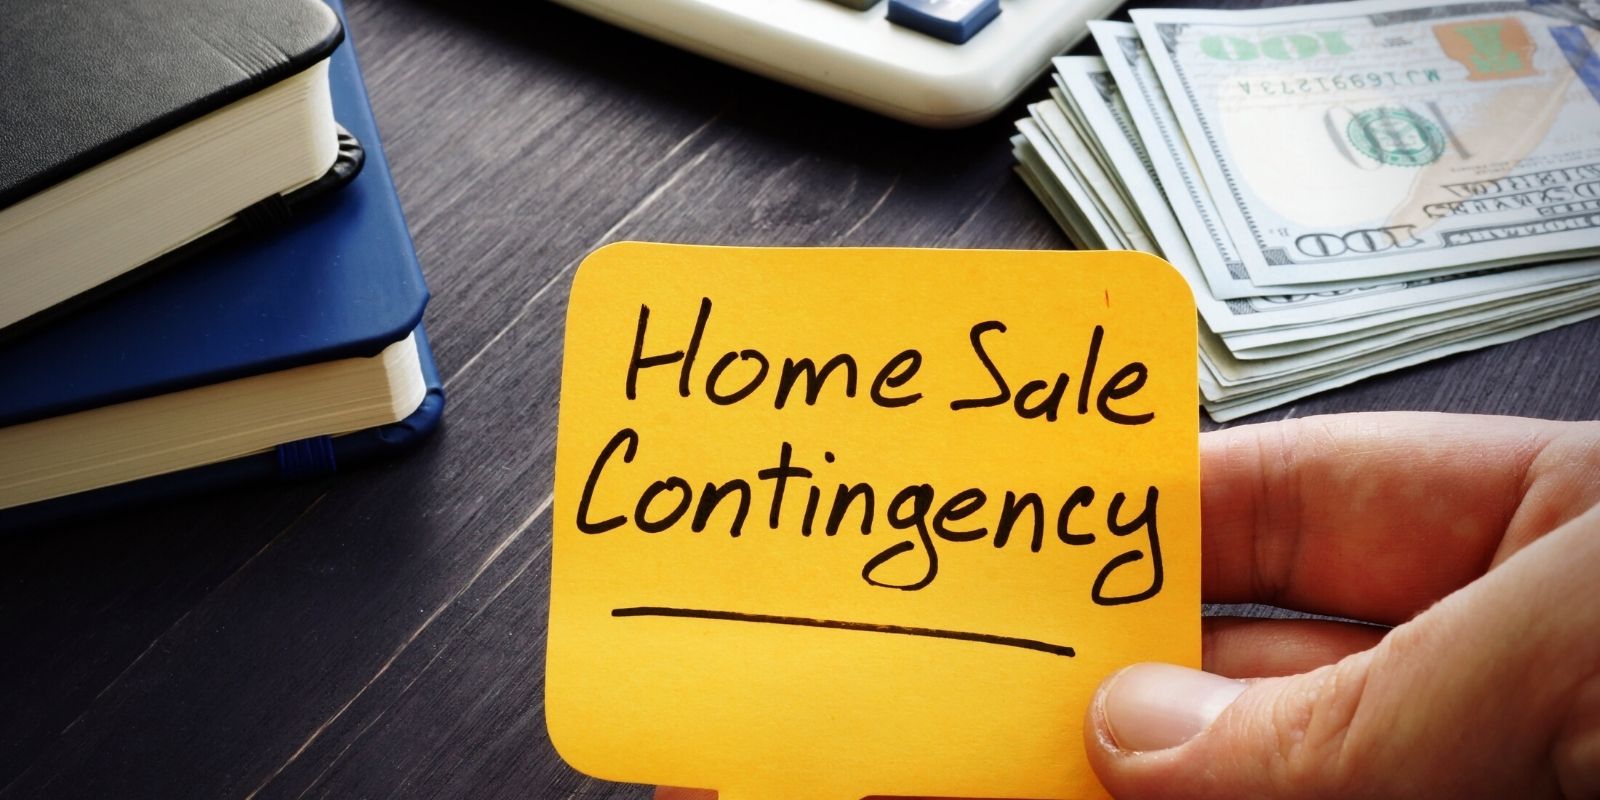 6. Home Sale Contingency